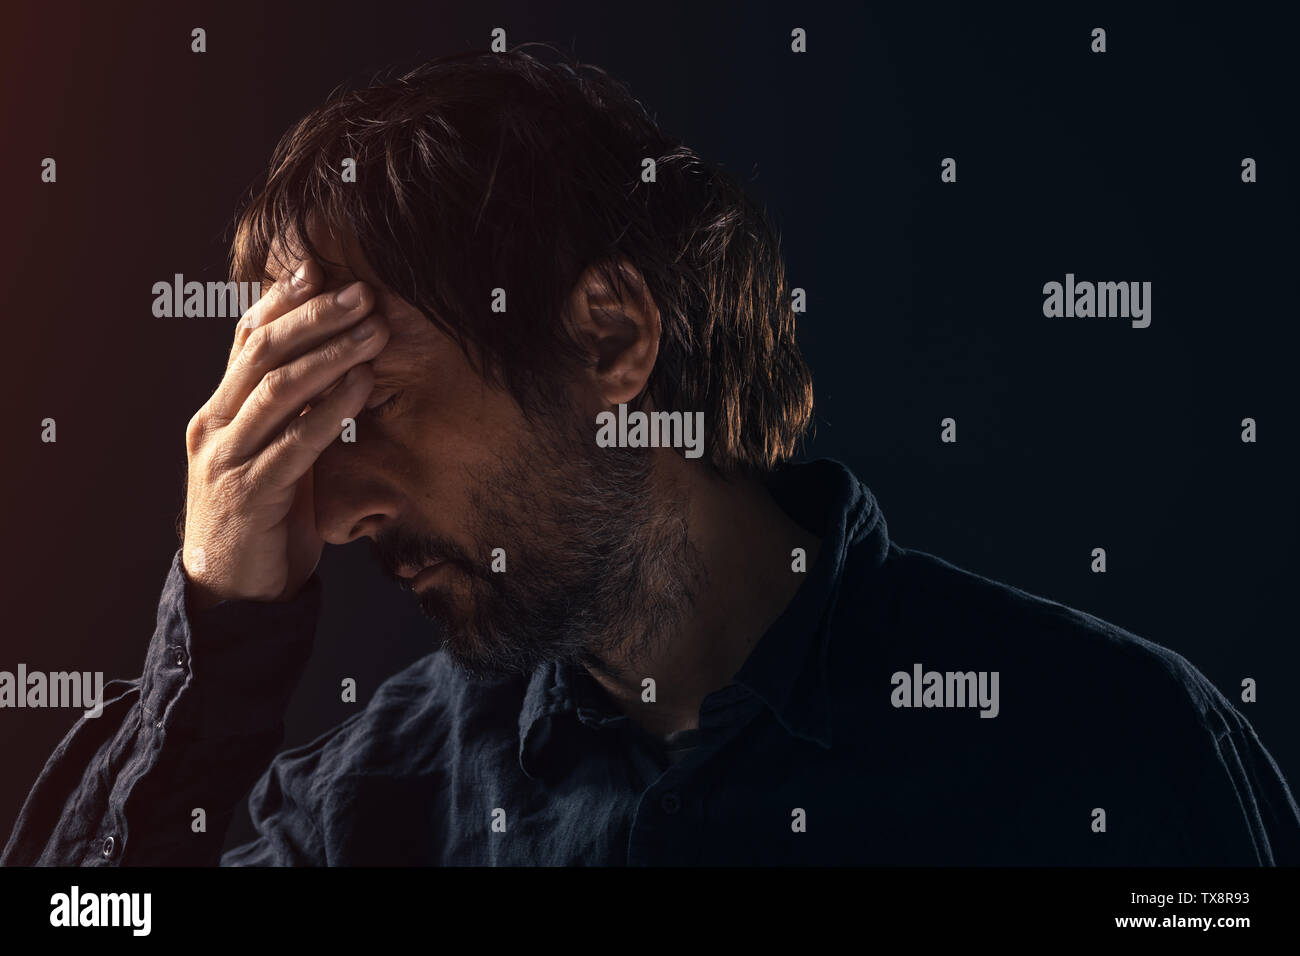 Depressed sad mid-adult man. Low key portrait of male person feeling heartbroken. Distraught state of mind and mental health concept. Stock Photo